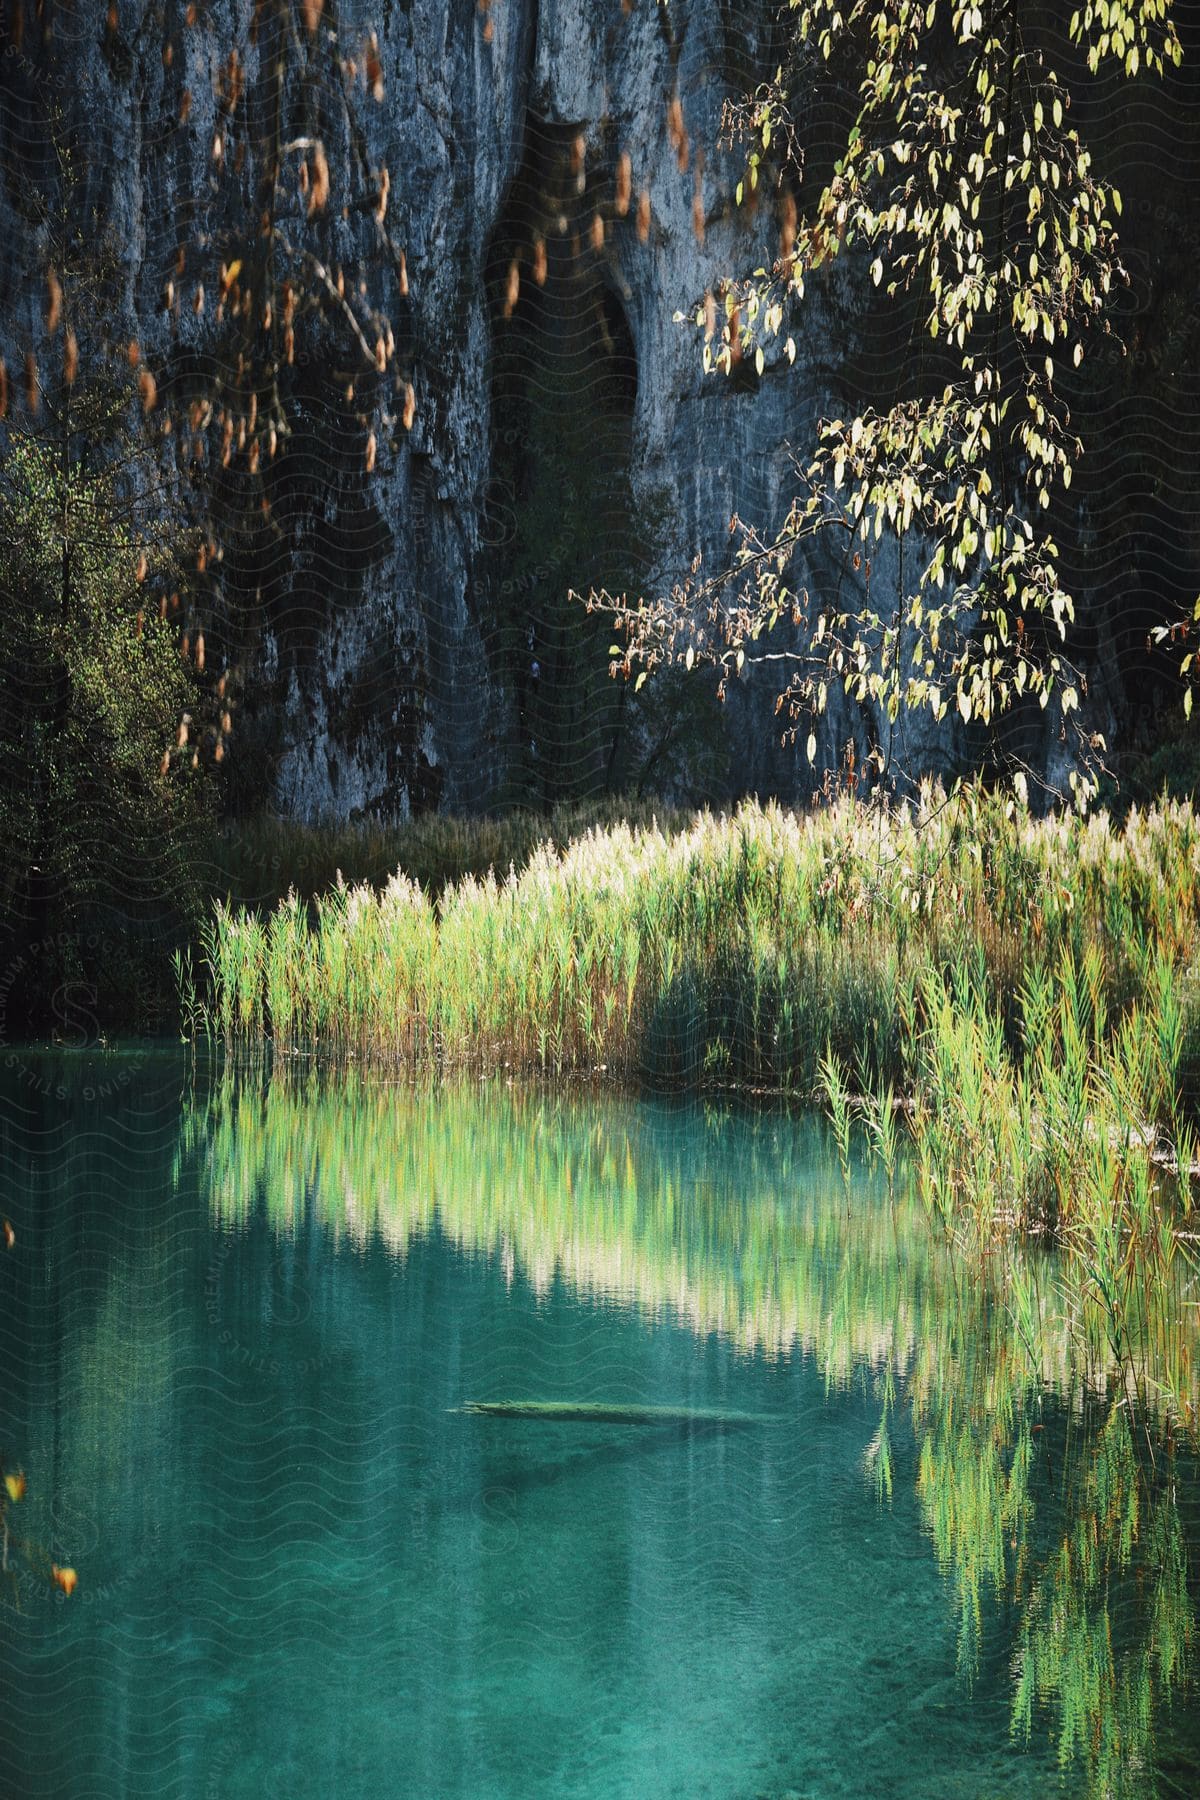 Crystal-clear turquoise lake with tall grasses and leaves, set against a cliff backdrop.